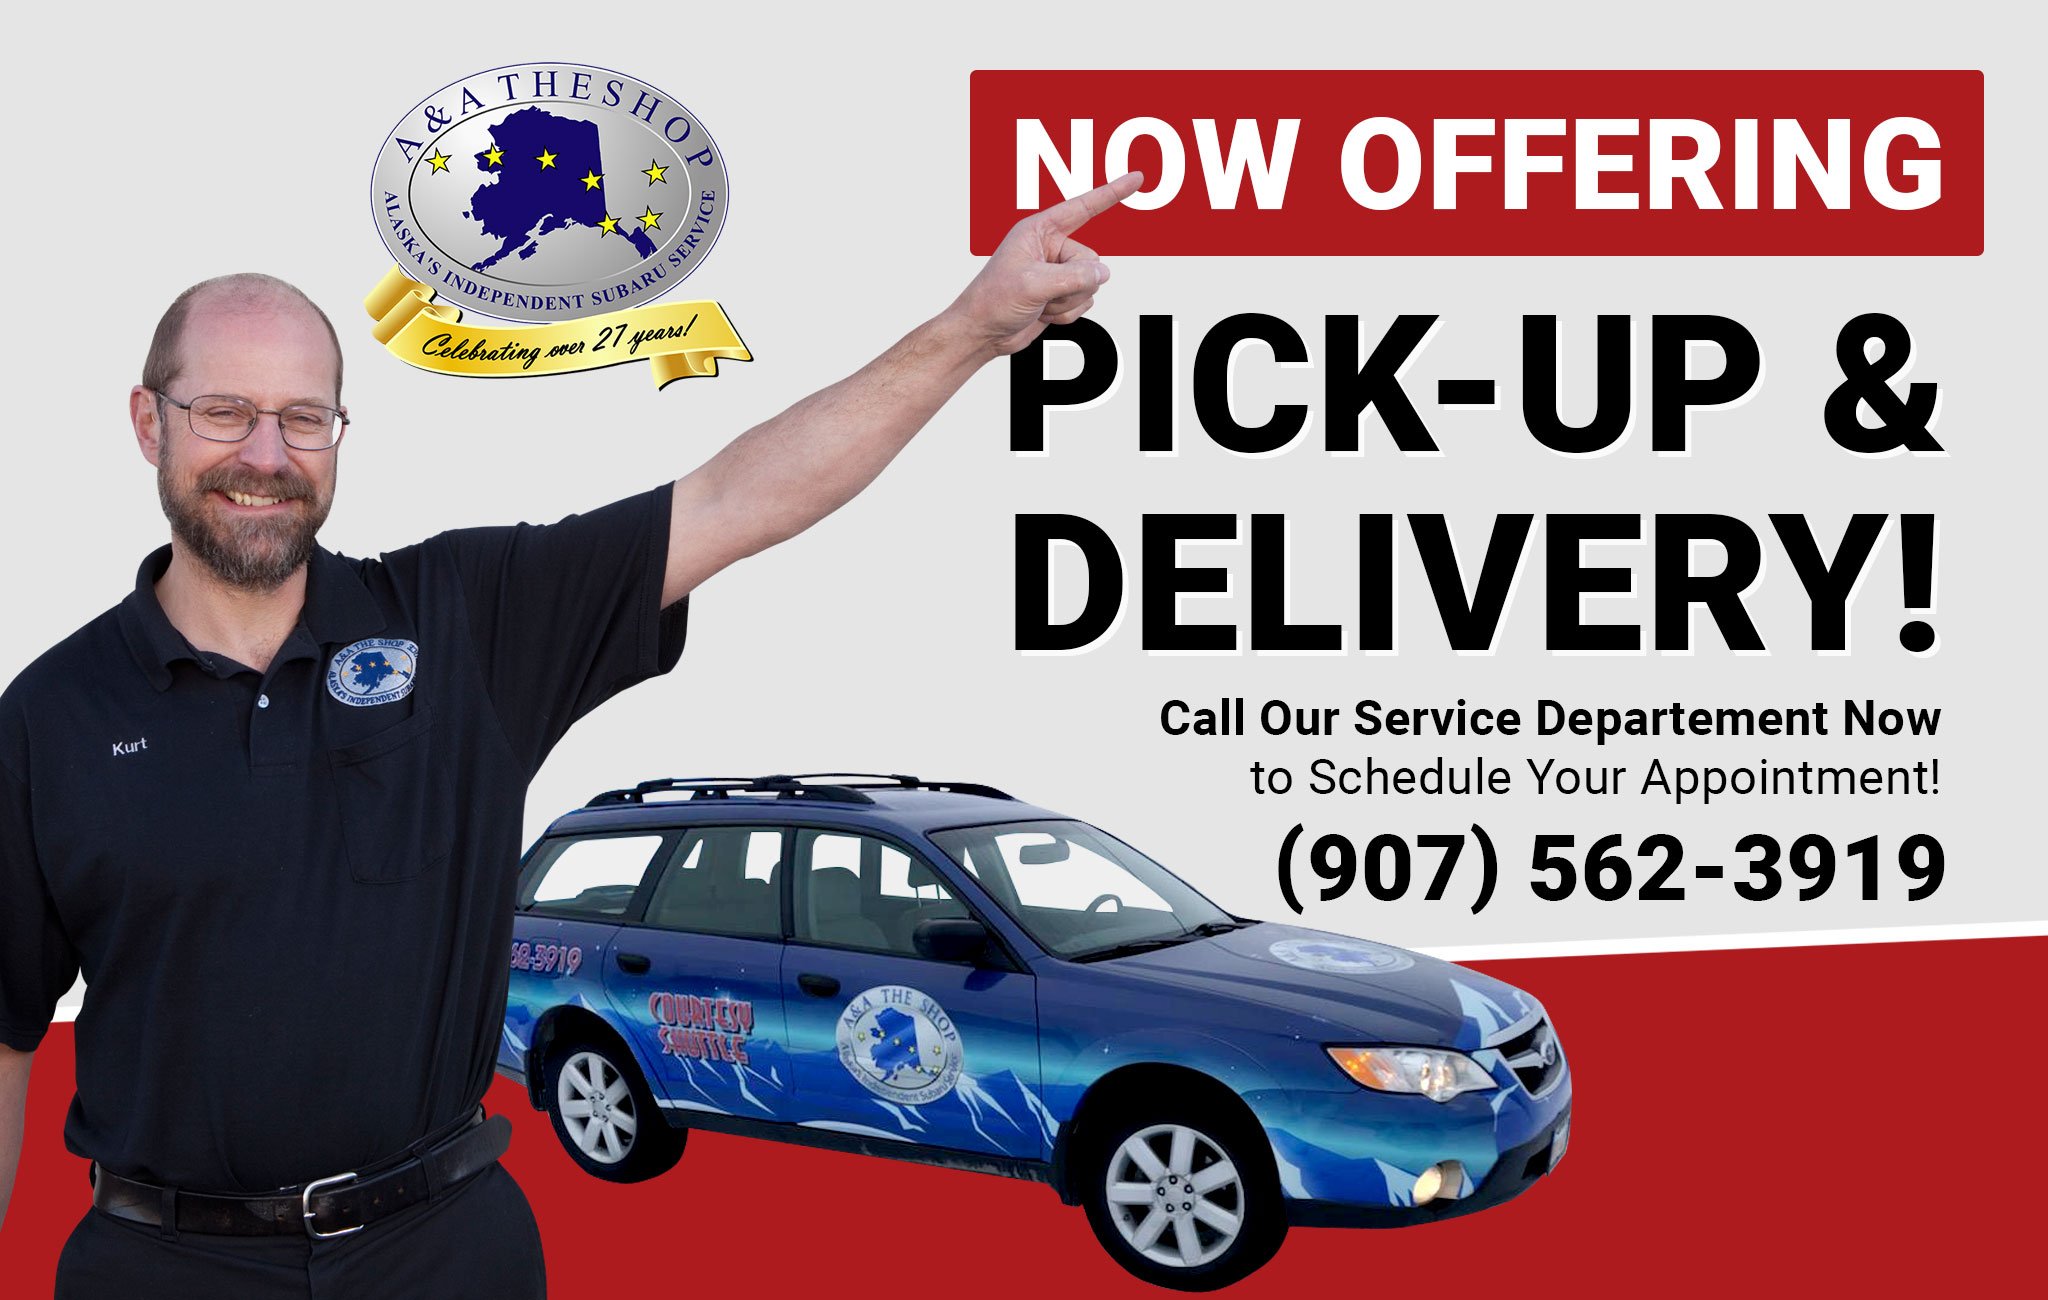 We’re now offering pick-up and delivery of our customers vehicles to minimize customer employee contact.